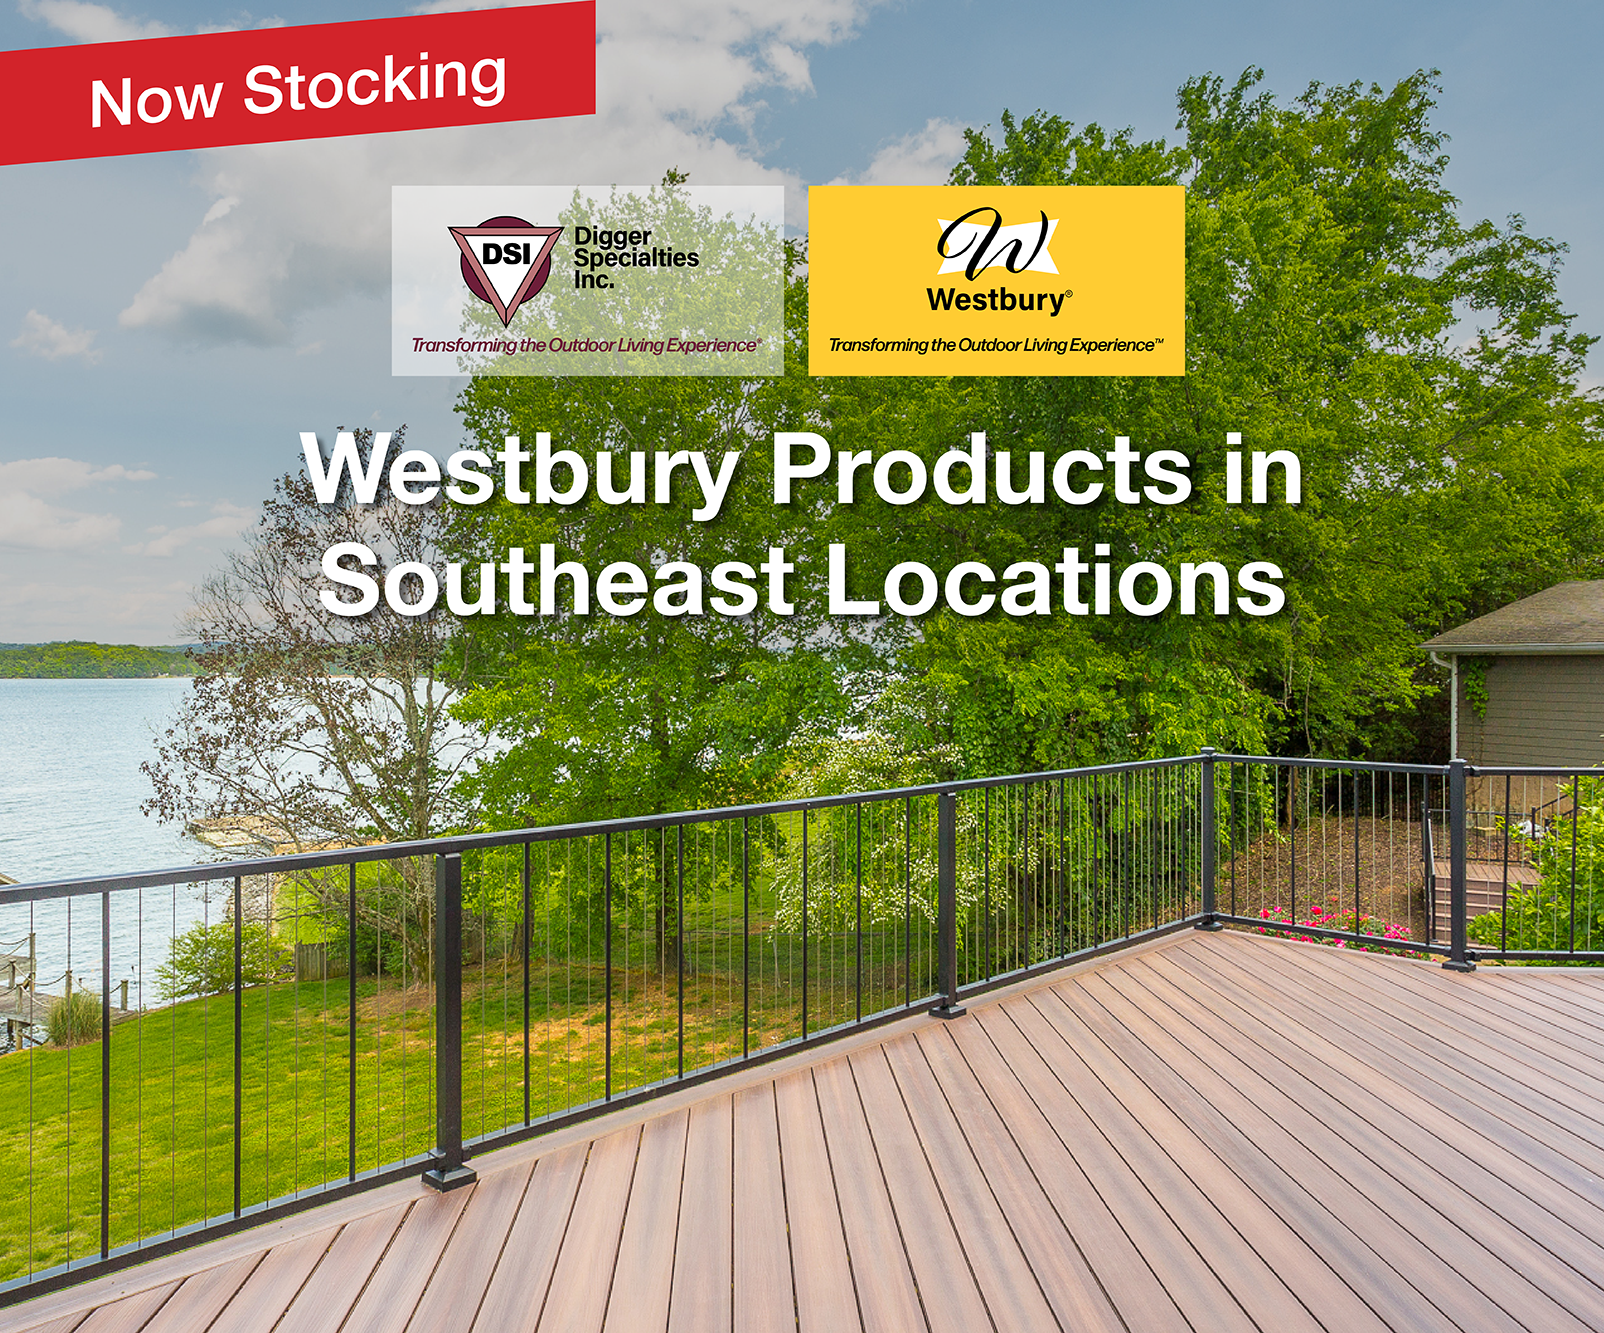 Palmer-Donavin Now Stocking Westbury Products in Southeast Locations